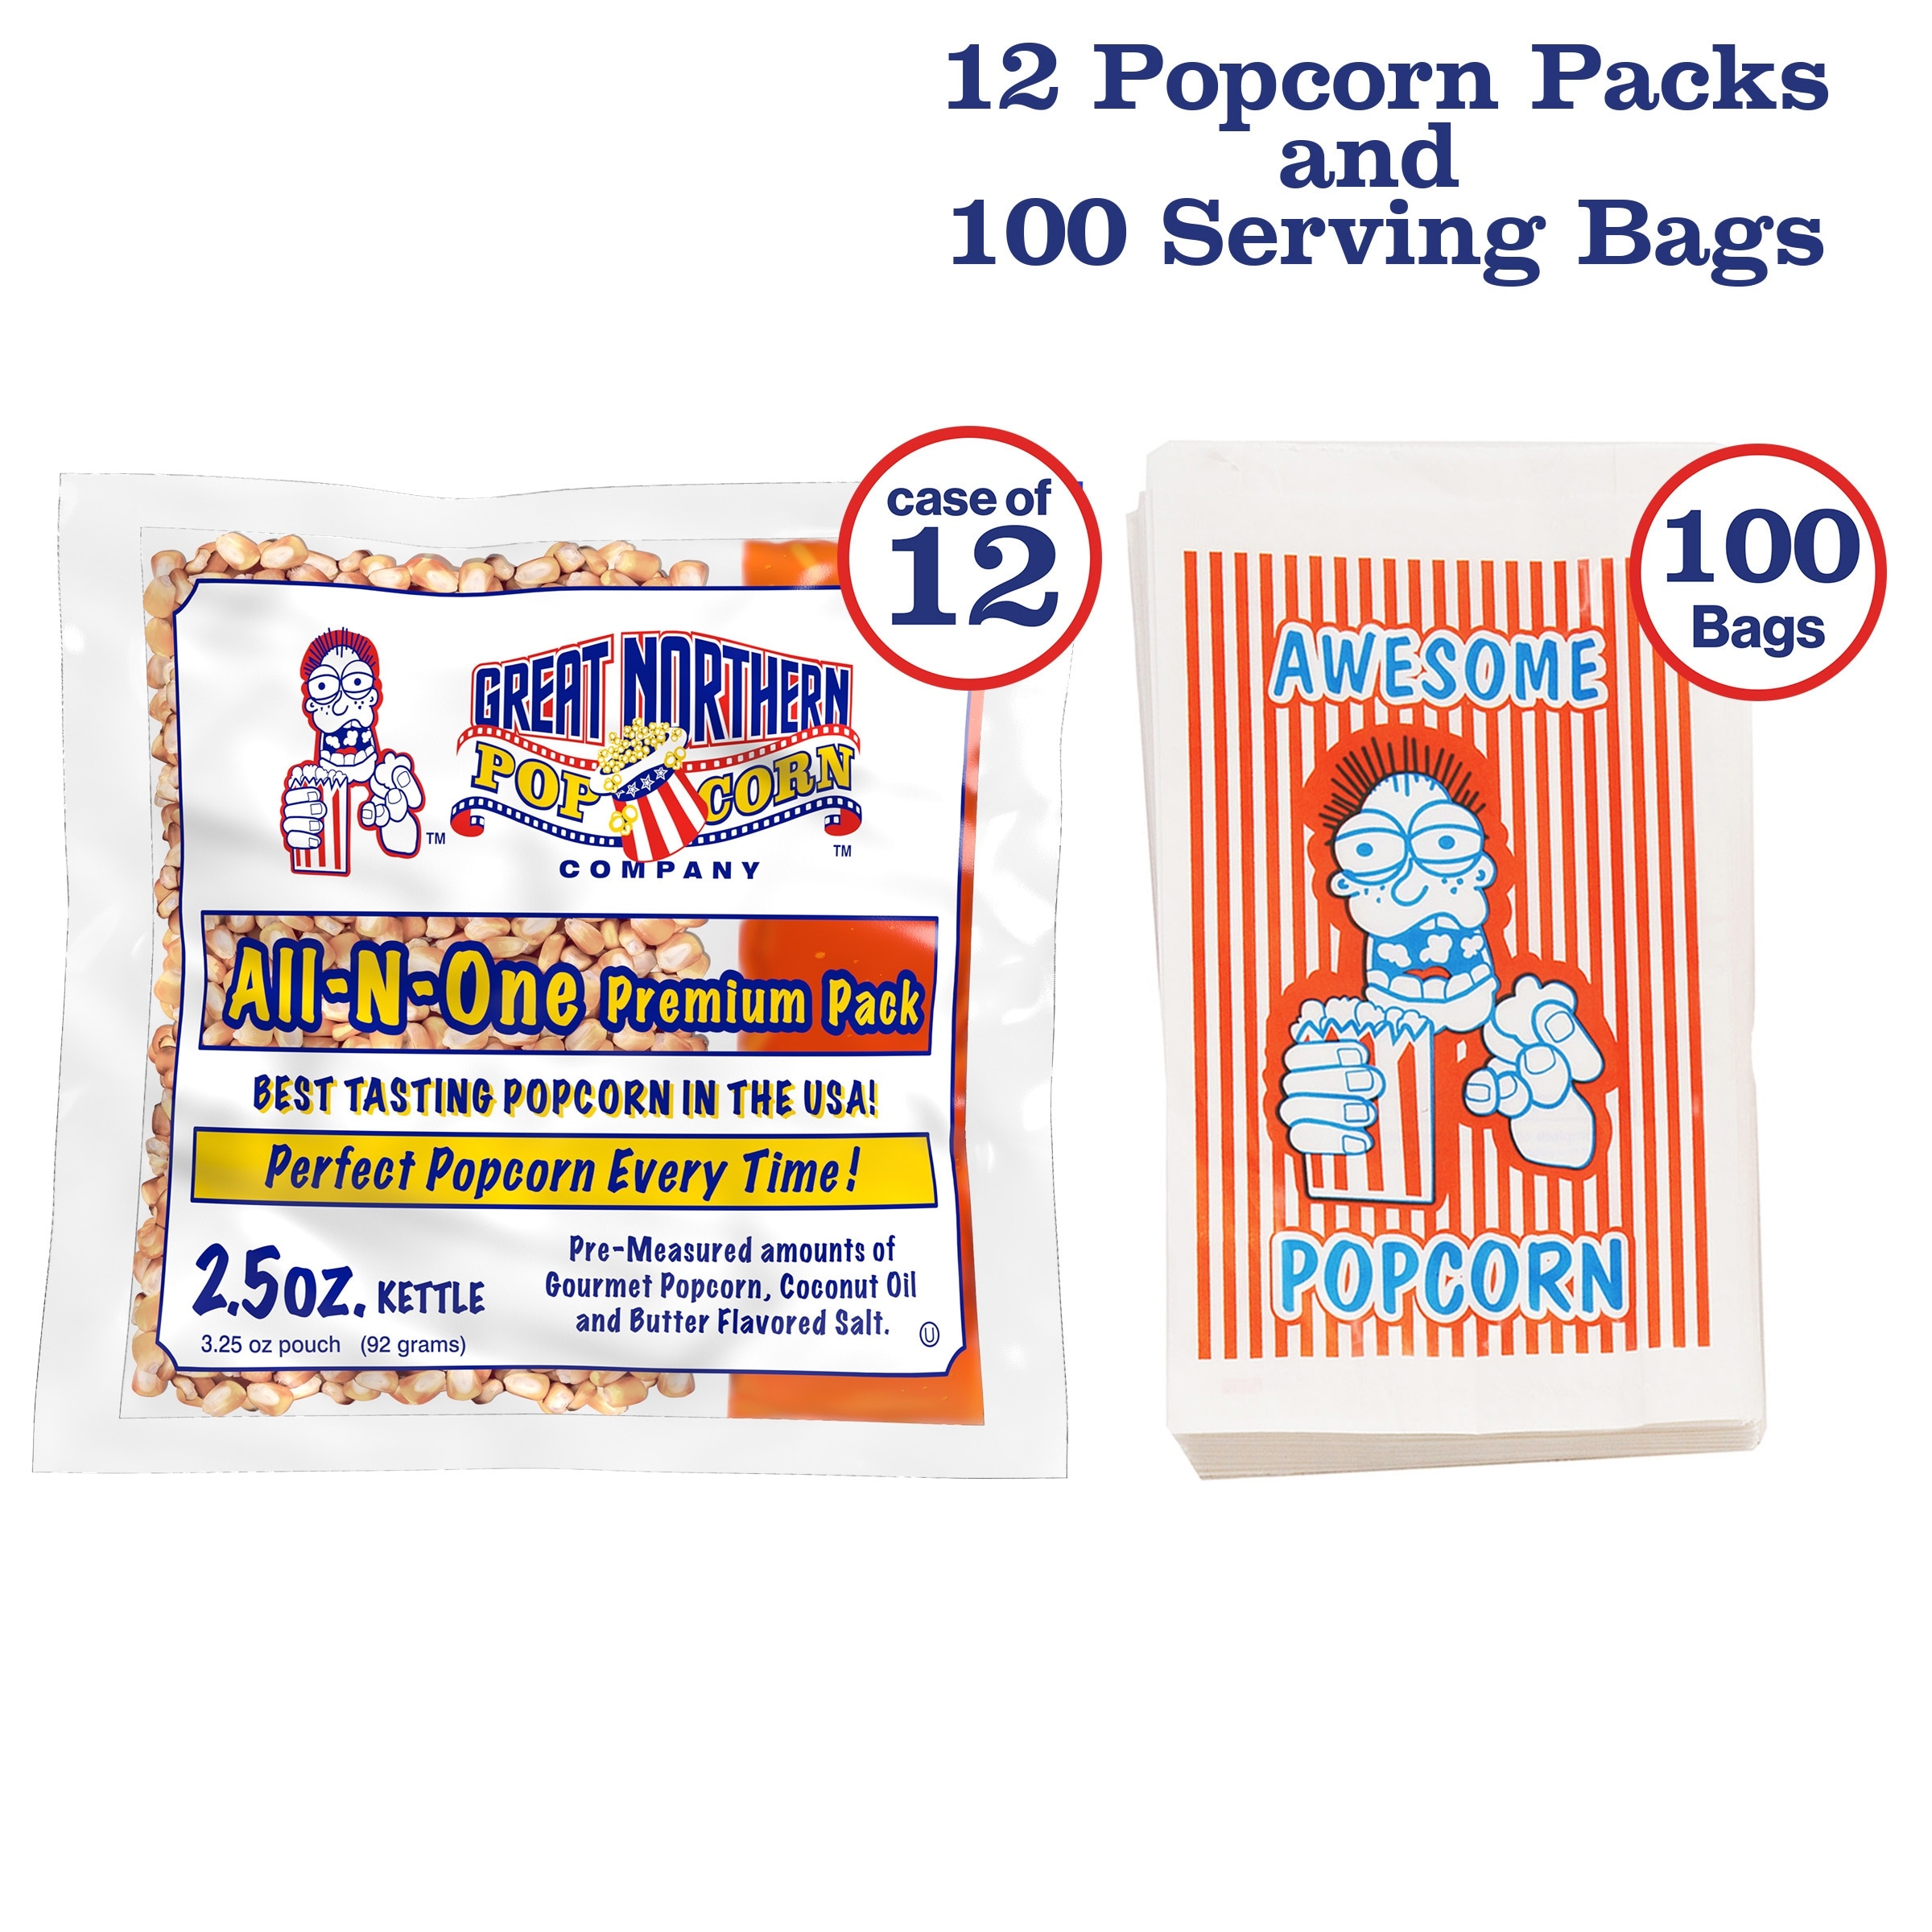 https://ak1.ostkcdn.com/images/products/is/images/direct/2a4334588882975138a6fcd6cfb4a30cd4395b19/2.5oz-Popcorn-Packs-and-100-Popcorn-Bags-by-Great-Northern-Popcorn.jpg